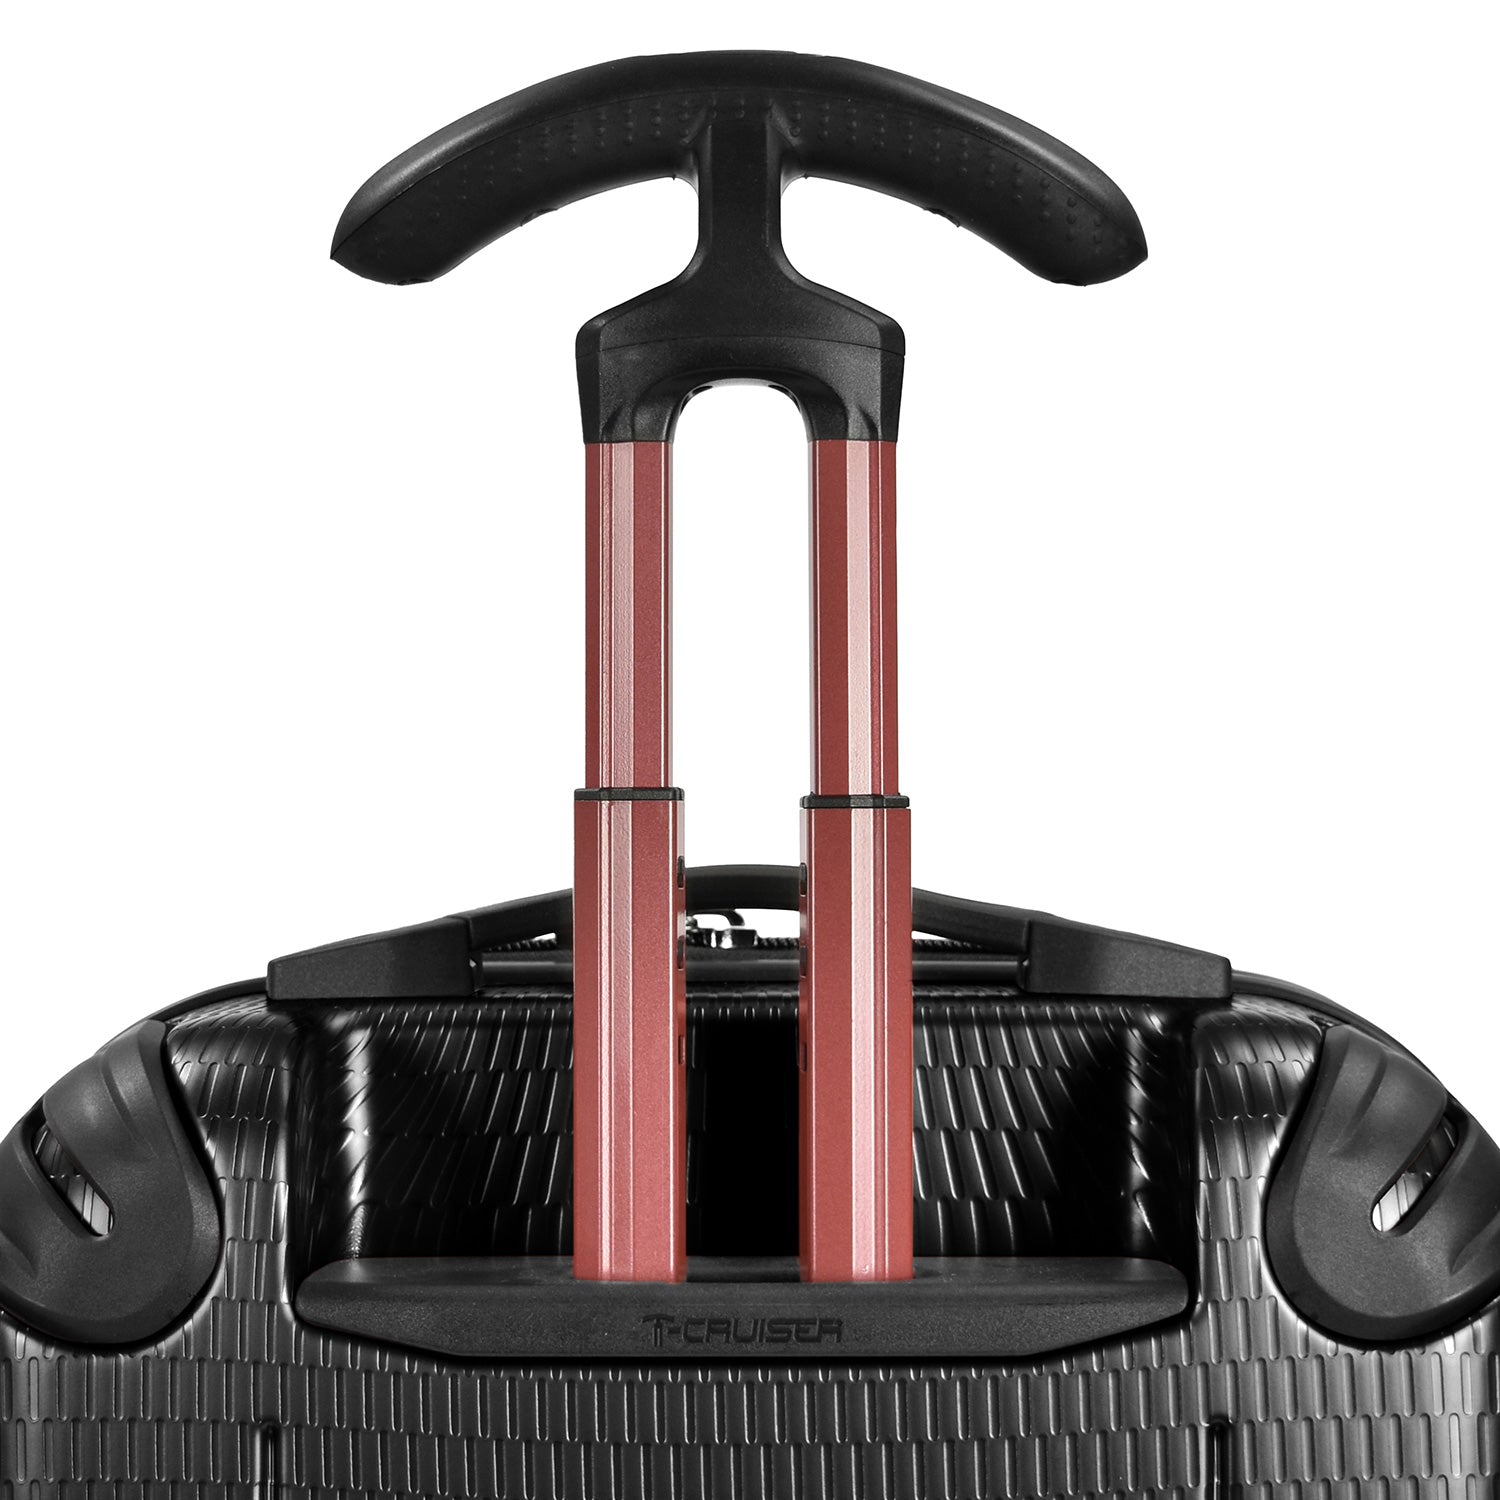 MaxPorter II Carry-on 22&quot; Hardside Spinner Luggage